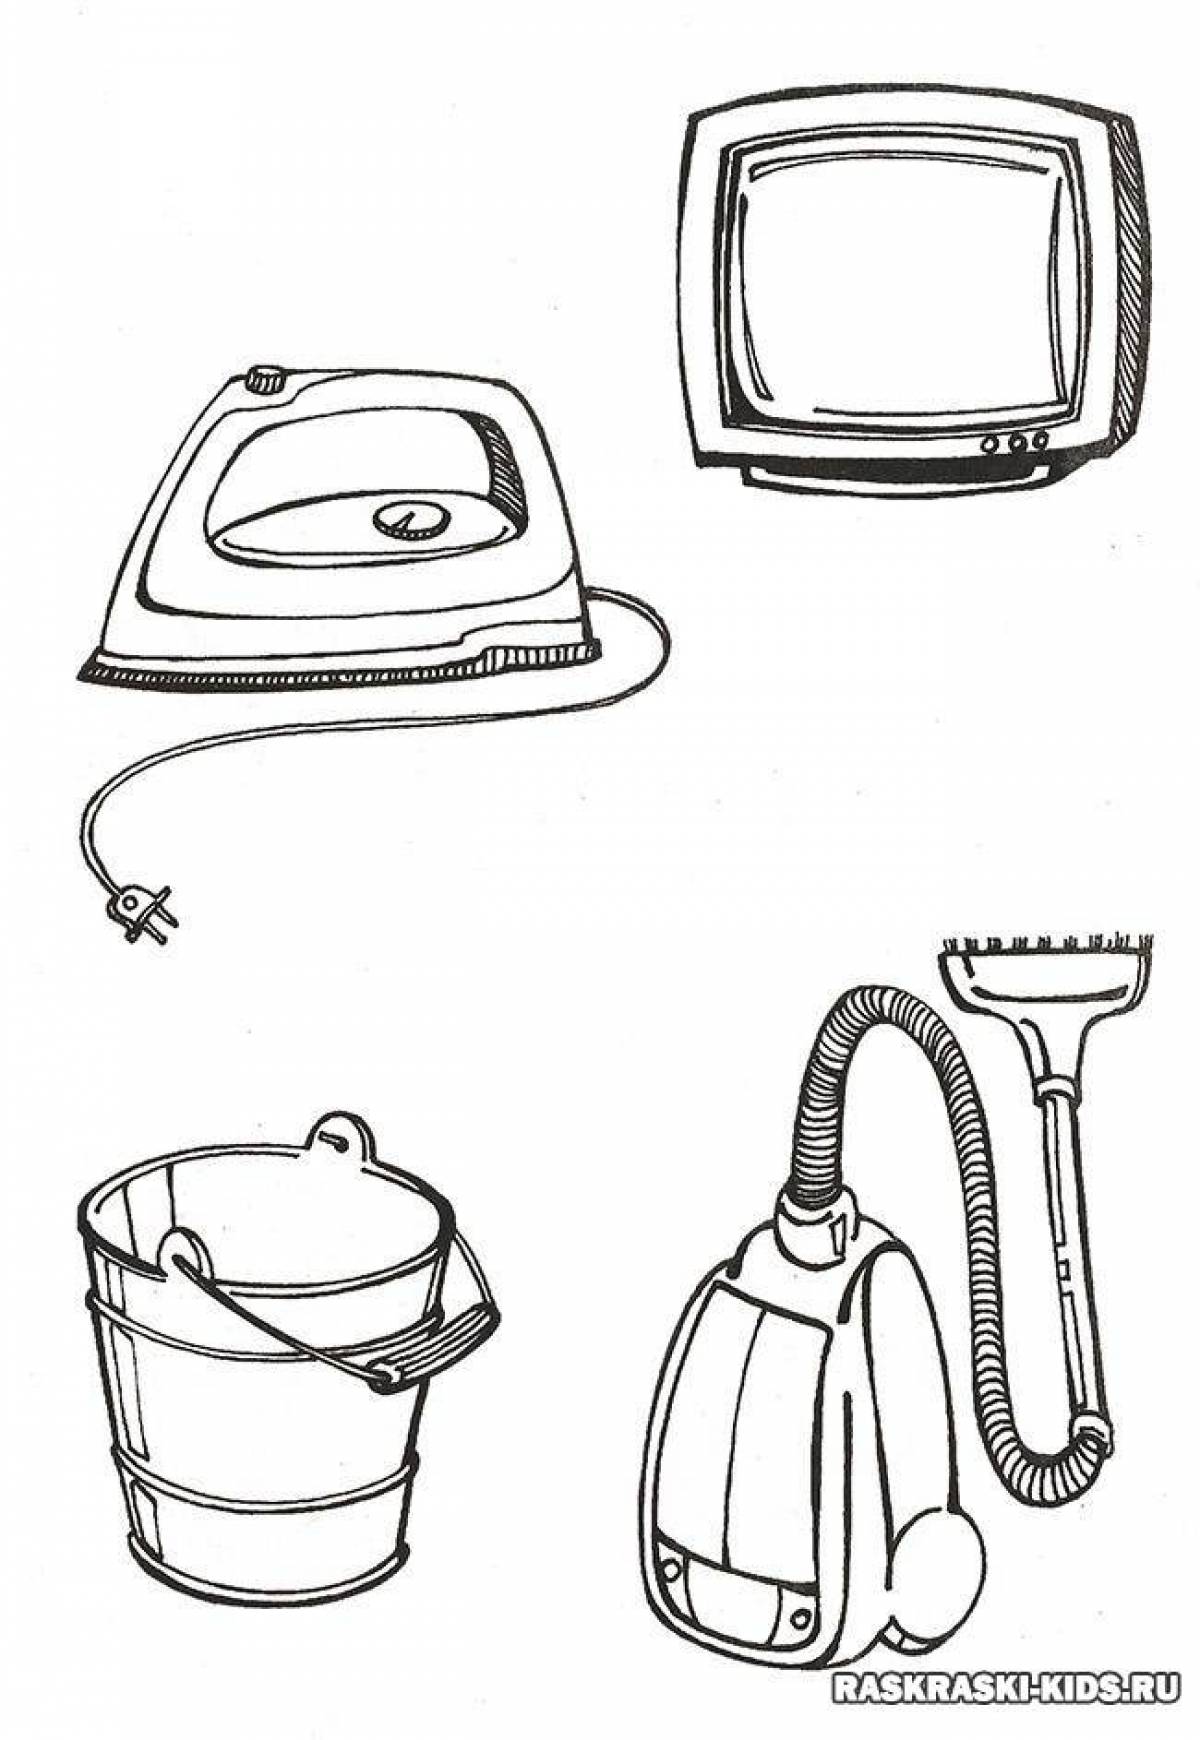 Colorful electrical appliances coloring page